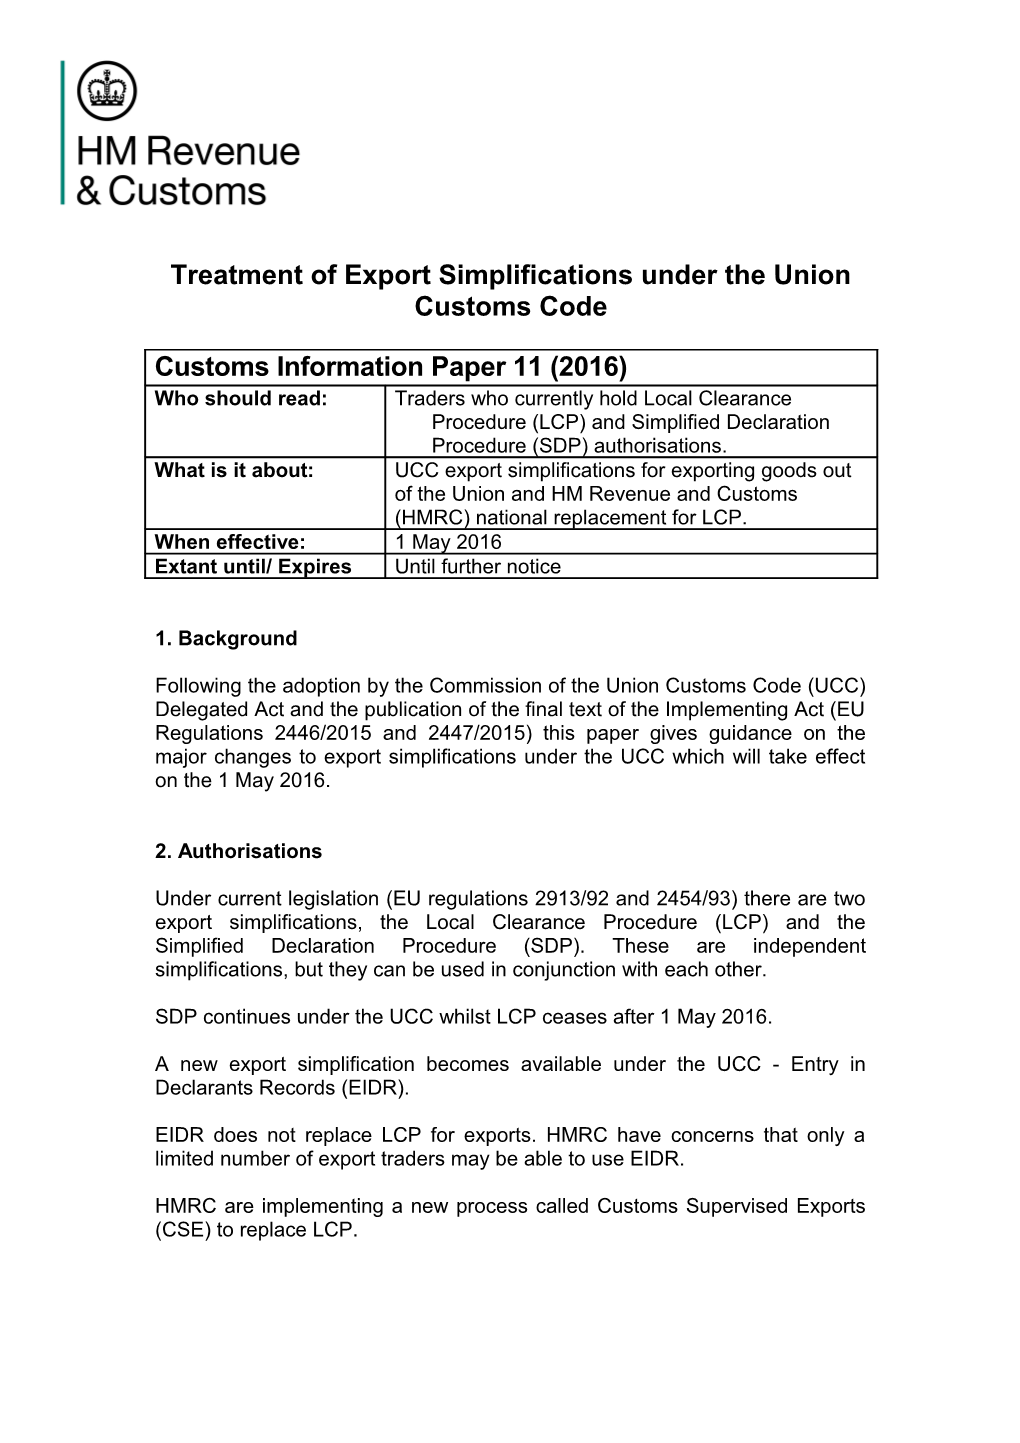 Treatment of Export Simplifications Under the Union Customs Code